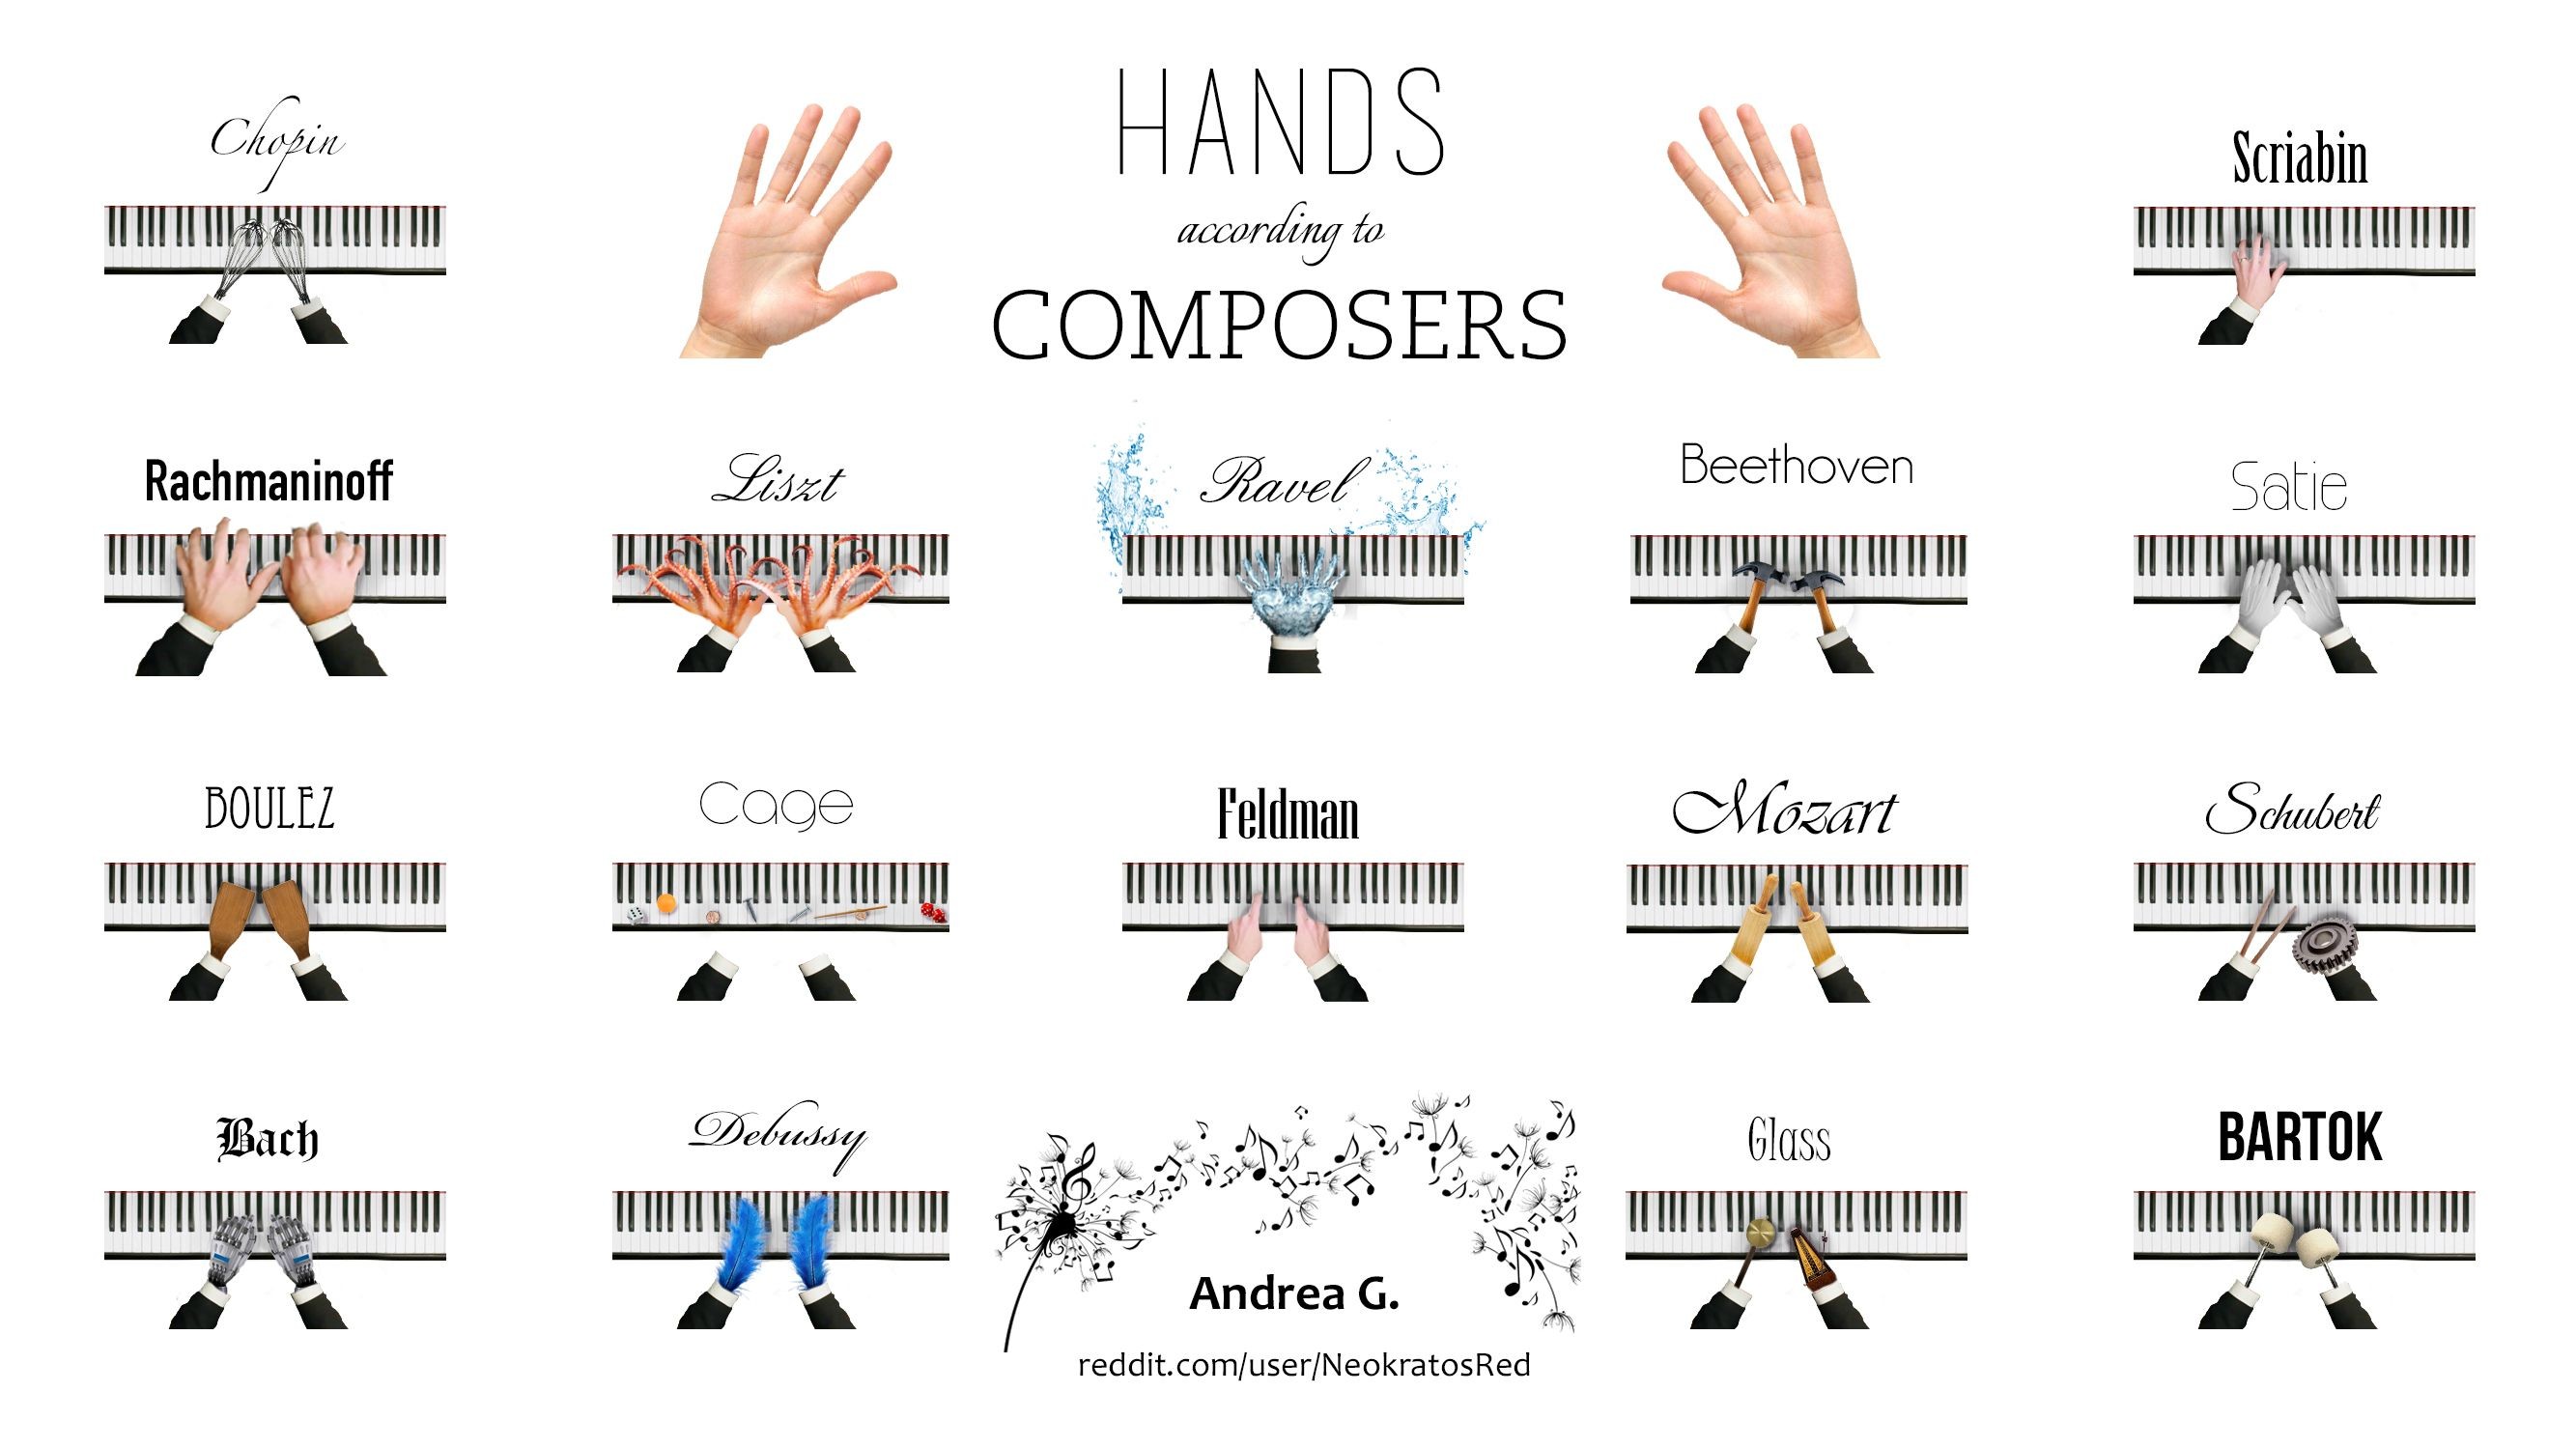 2667x1500 Hands according to composers [Final Version] (Wallpaper Size) ...